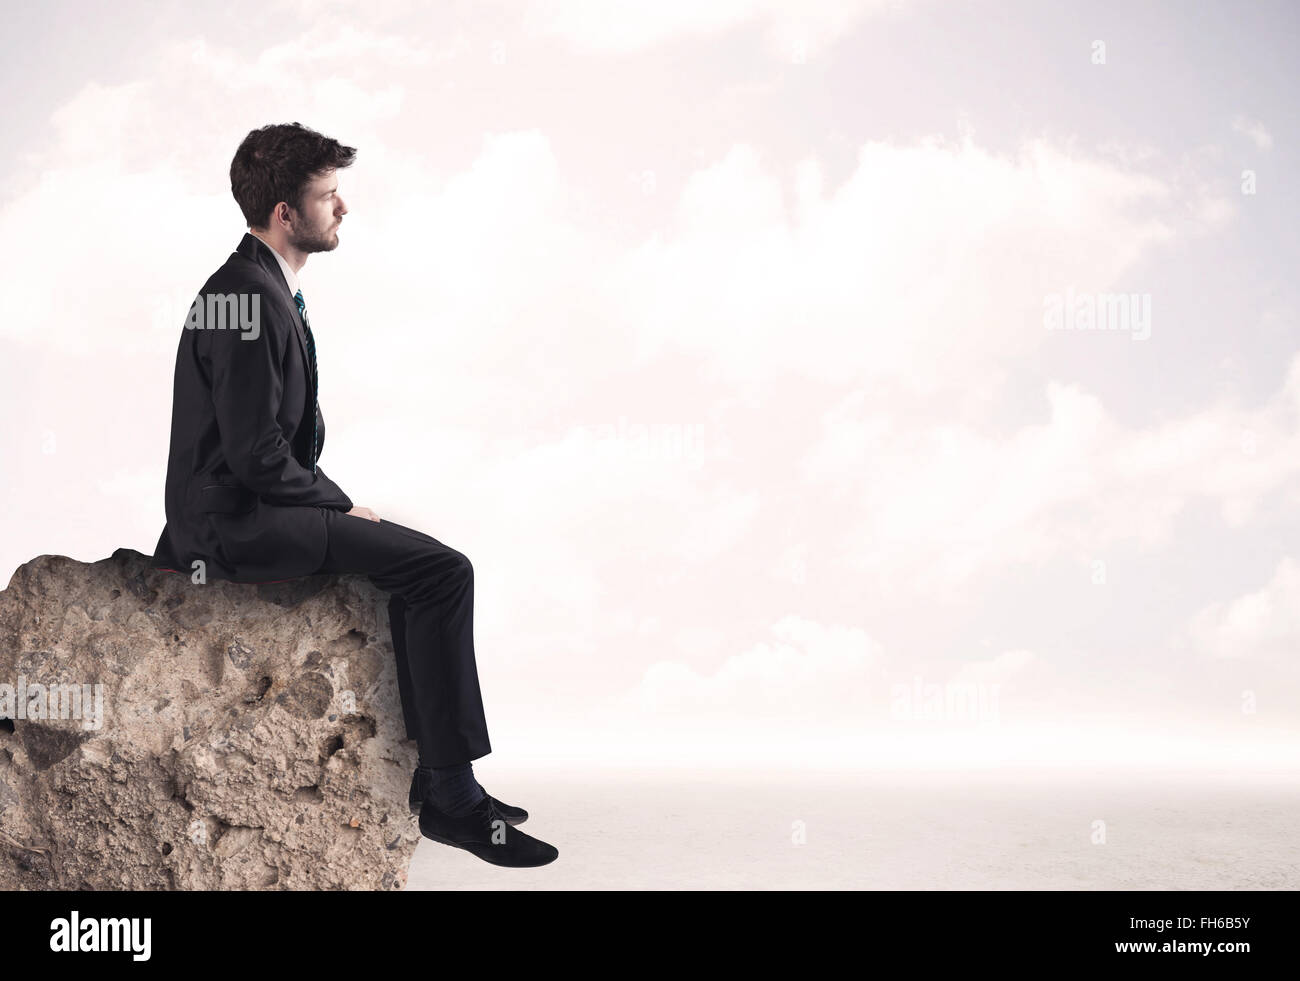 Business man sitting on stone edge Banque D'Images